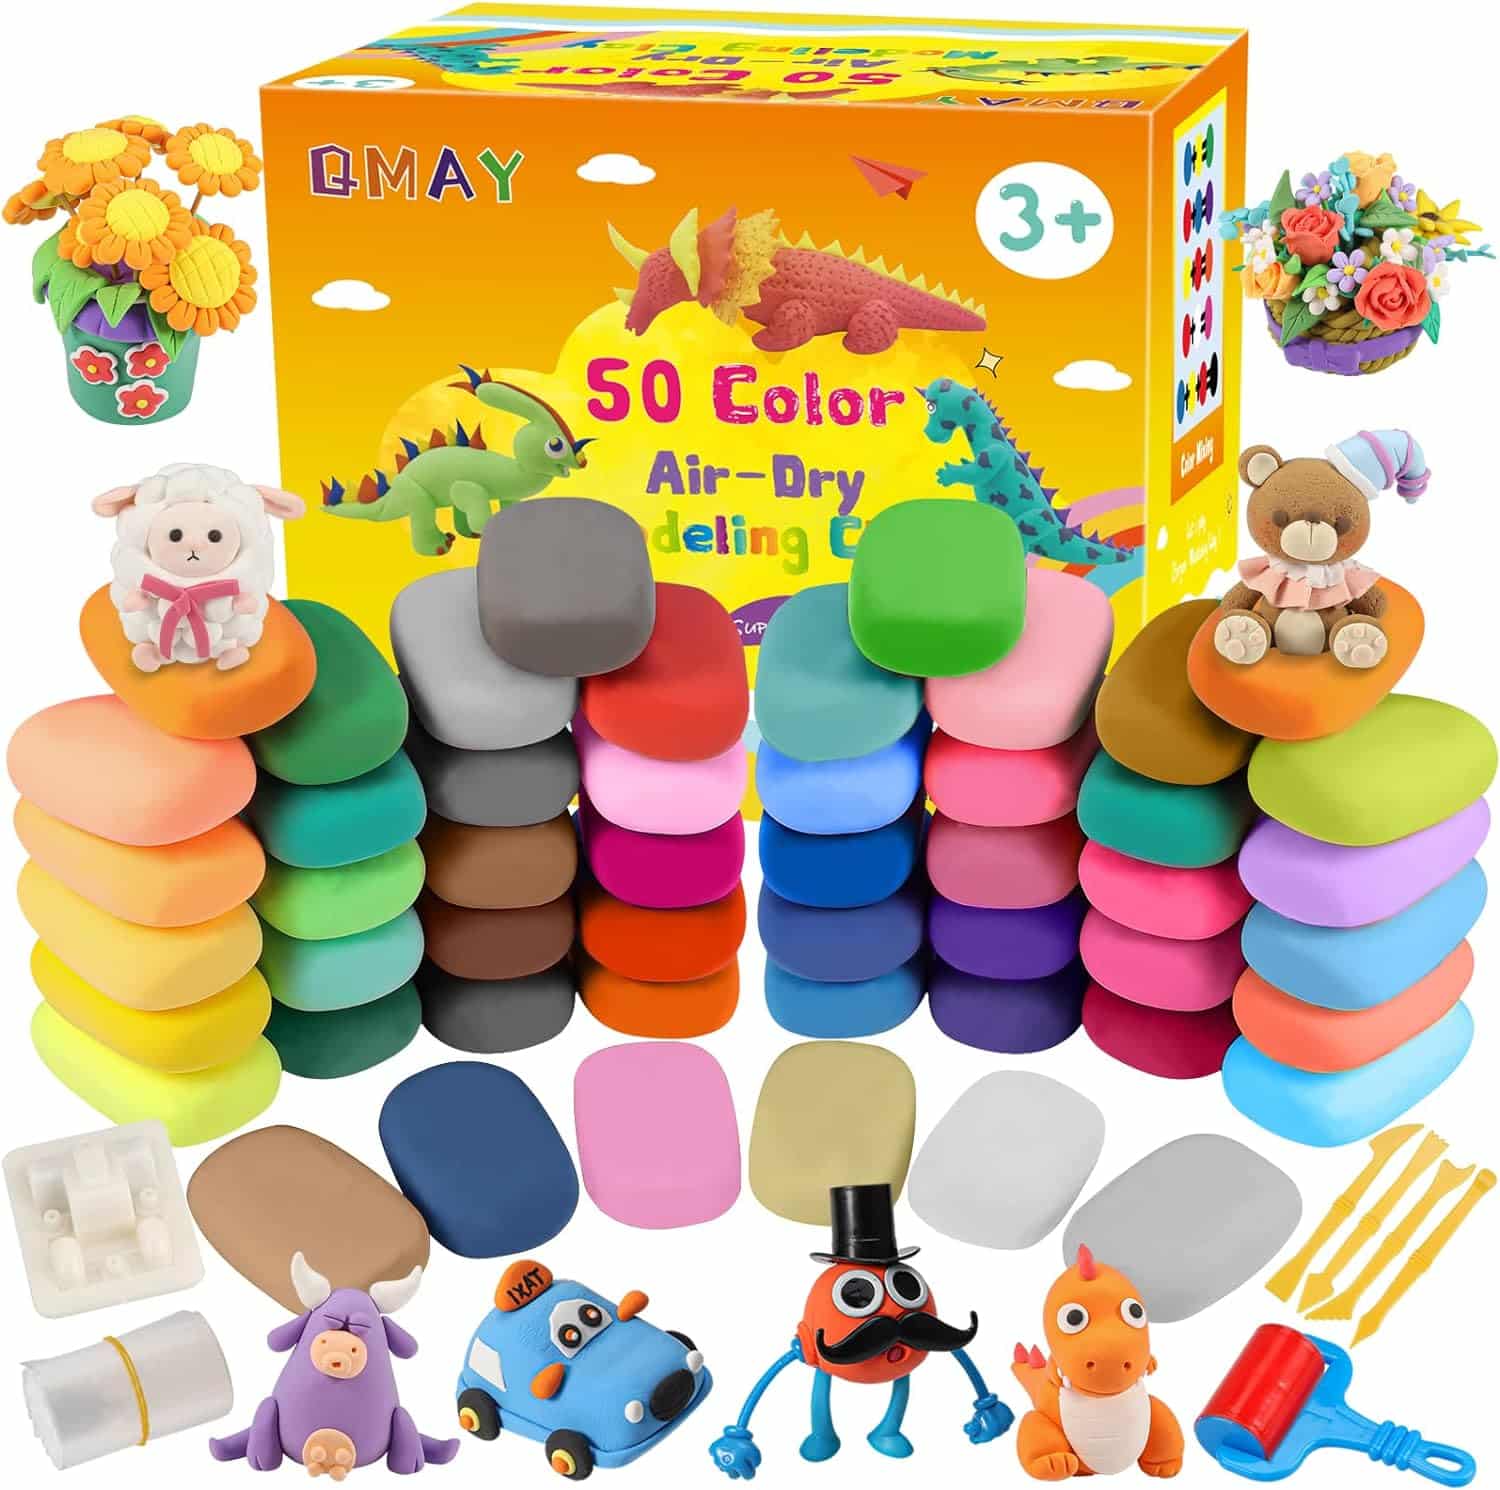 QMAY Modeling Clay Kit - 50 Colors Air Dry Ultra Light Clay 9502